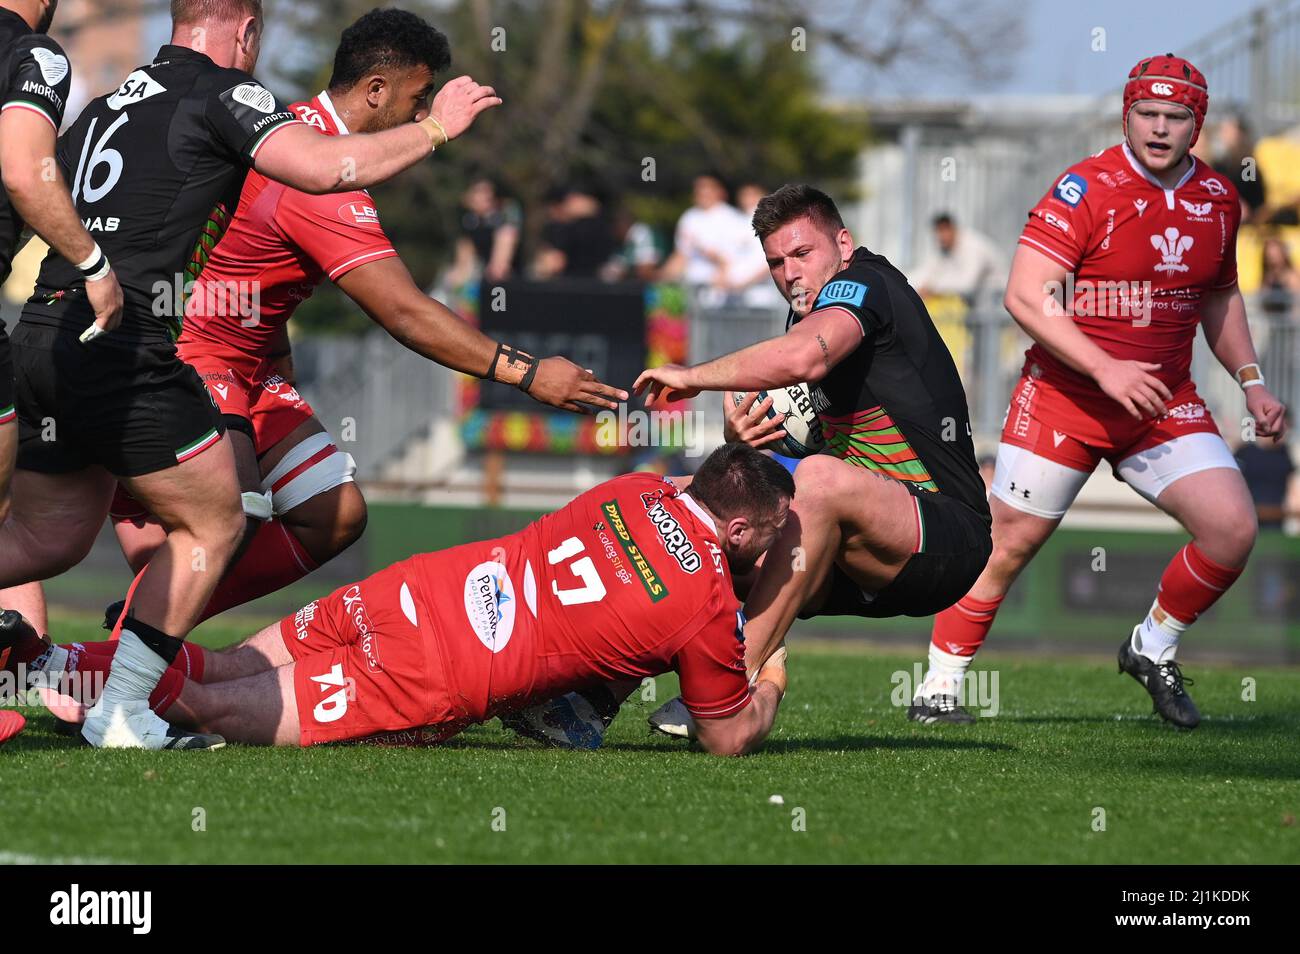 Parma, Italia. 26th Mar, 2022. iacopo bianchi (zebre) durante Zebre Rugby Club vs Scarlets, United Rugby Championship match a Parma, Italy, March 26 2022 Credit: Independent Photo Agency/Alamy Live News Foto Stock